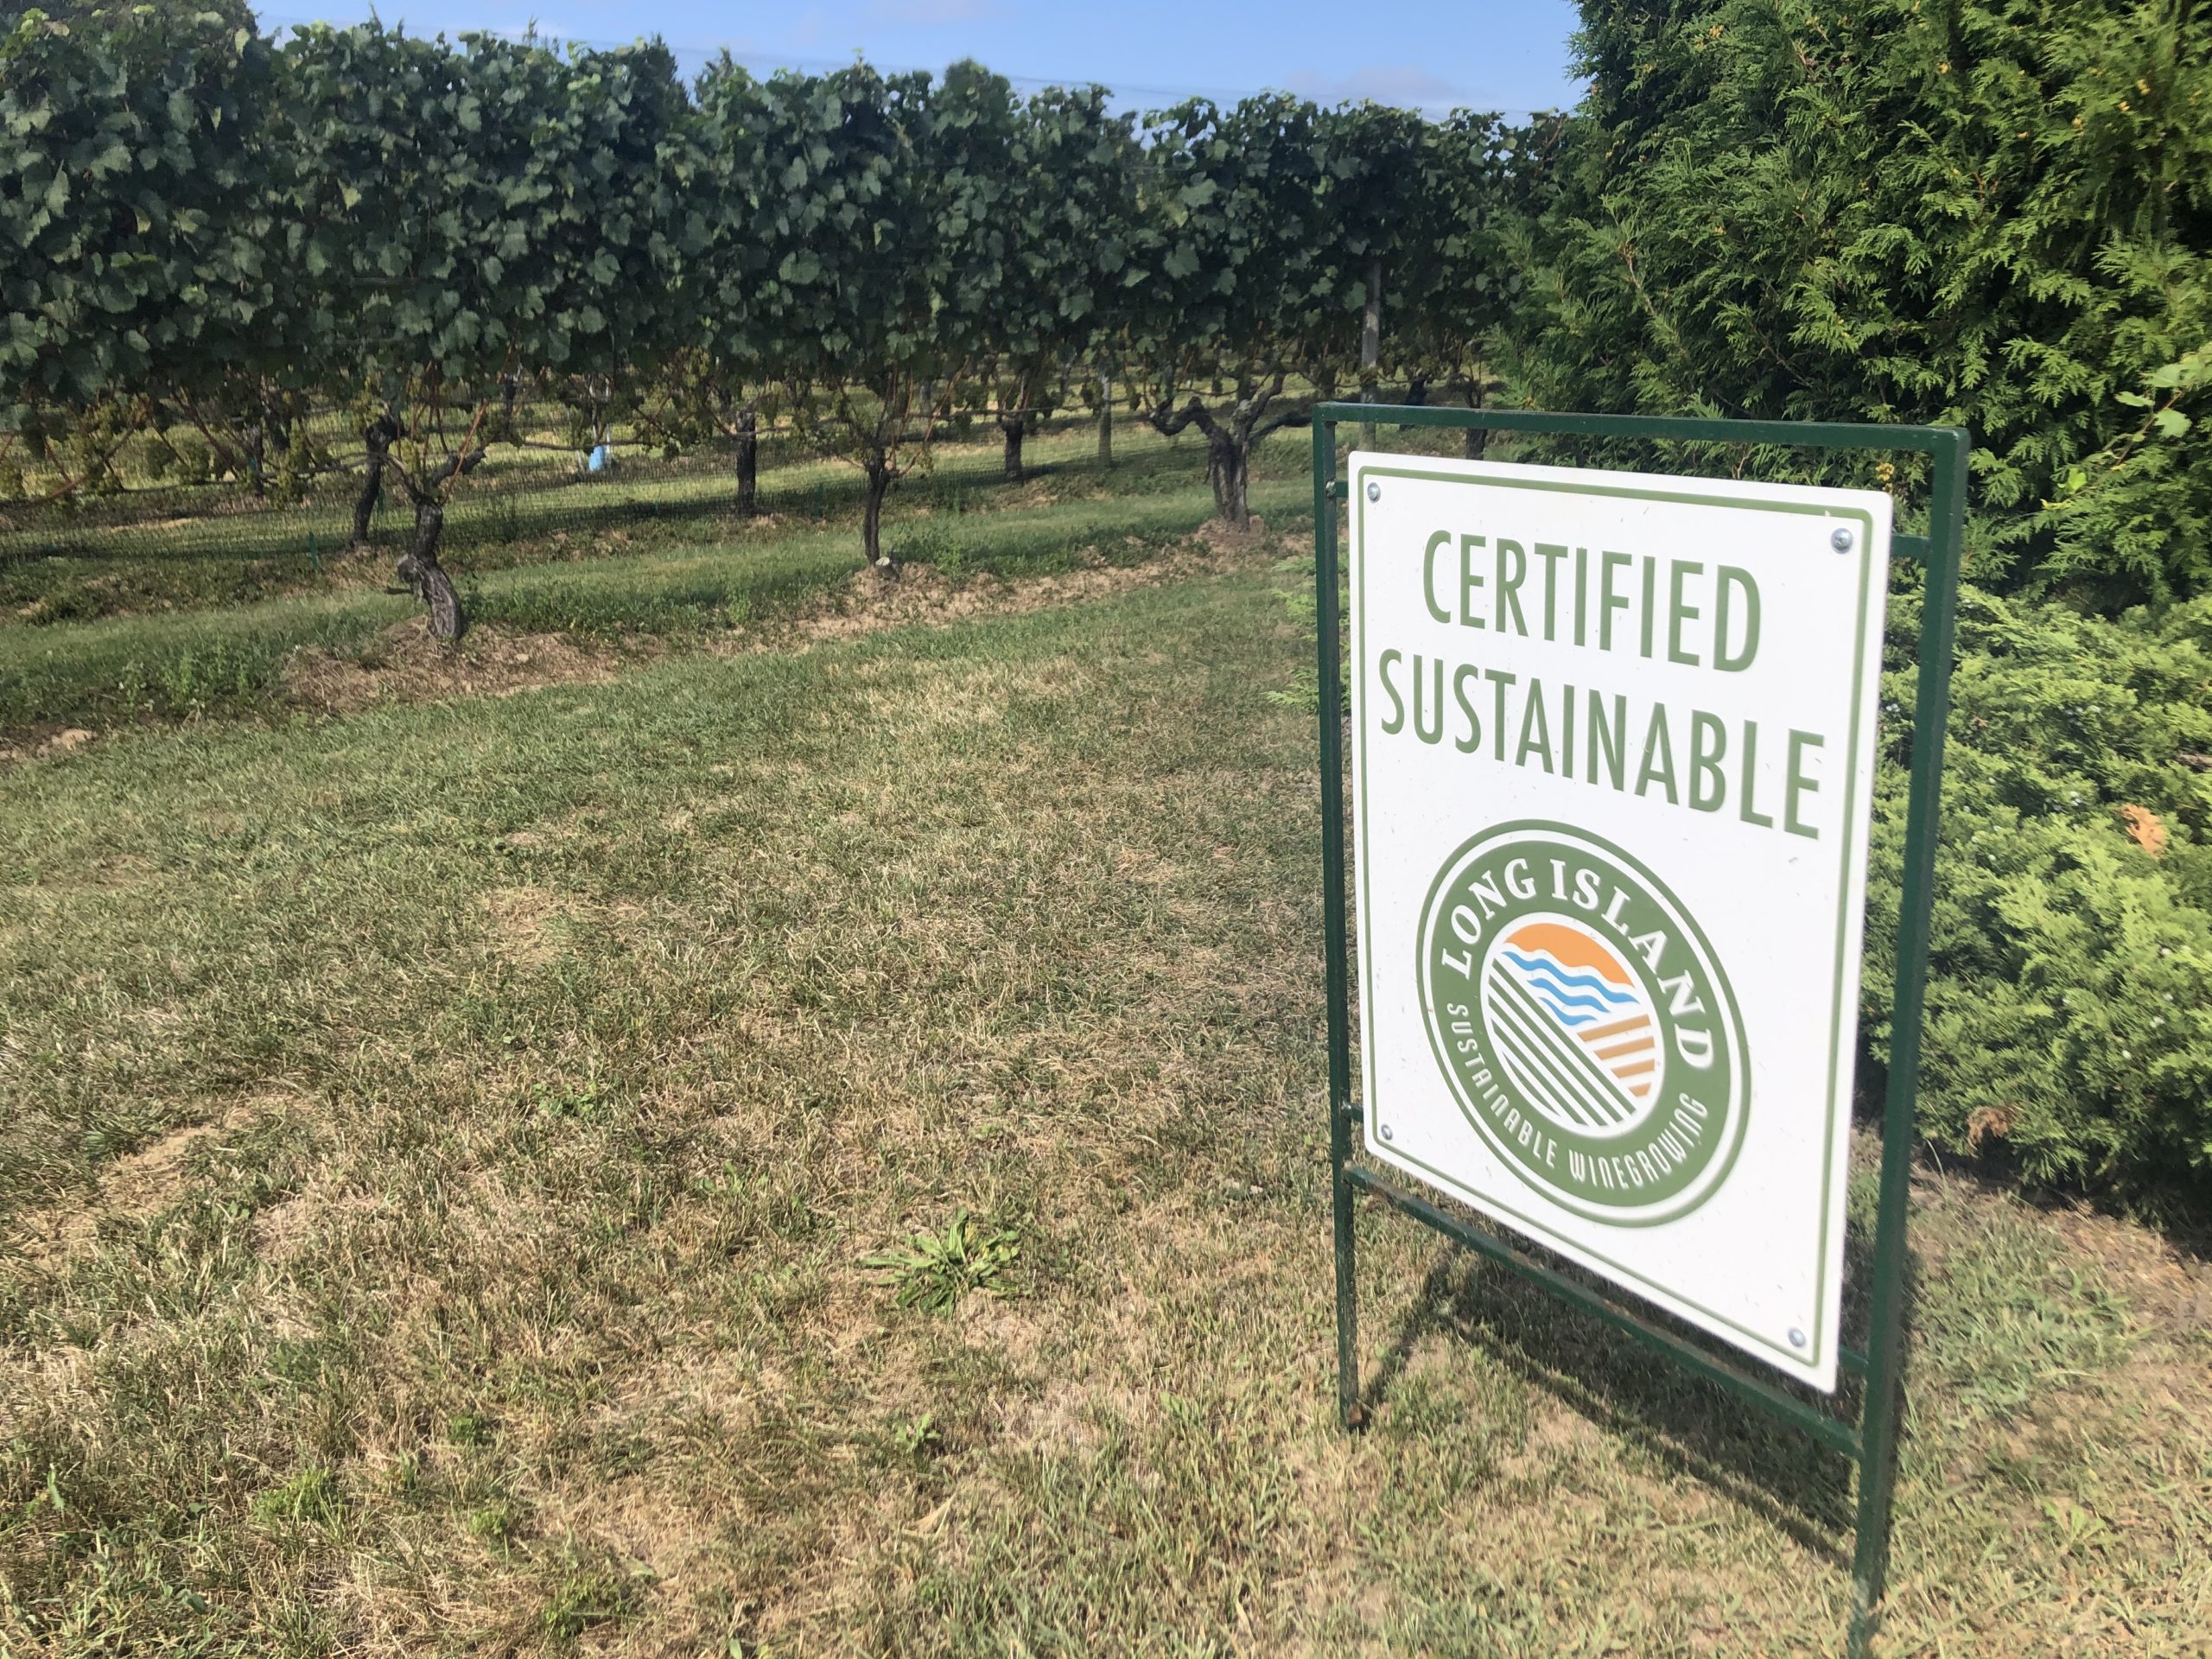 A certified sustainable sign at Wolffer Estate Vineyards.